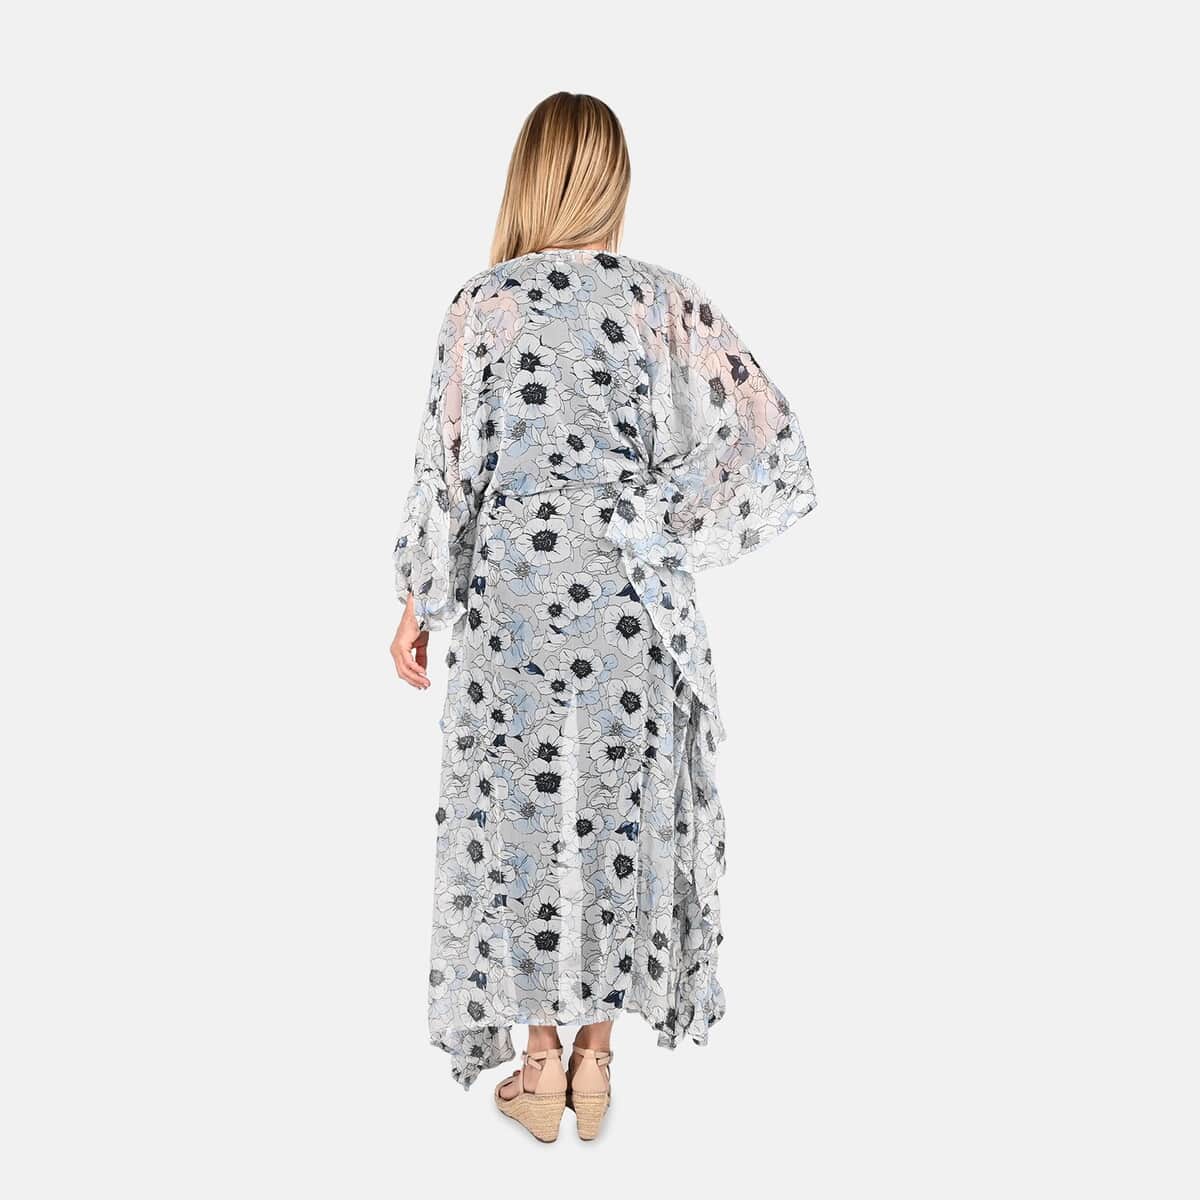 Tamsy Gray With Black Floral Printed Chiffon Kaftan Dress With Waist Tie Drawstring & Ruffle Hem - One Size Fits Most , Holiday Dress , Swimsuit Cover Up , Beach Cover Ups , Holiday Clothes image number 1